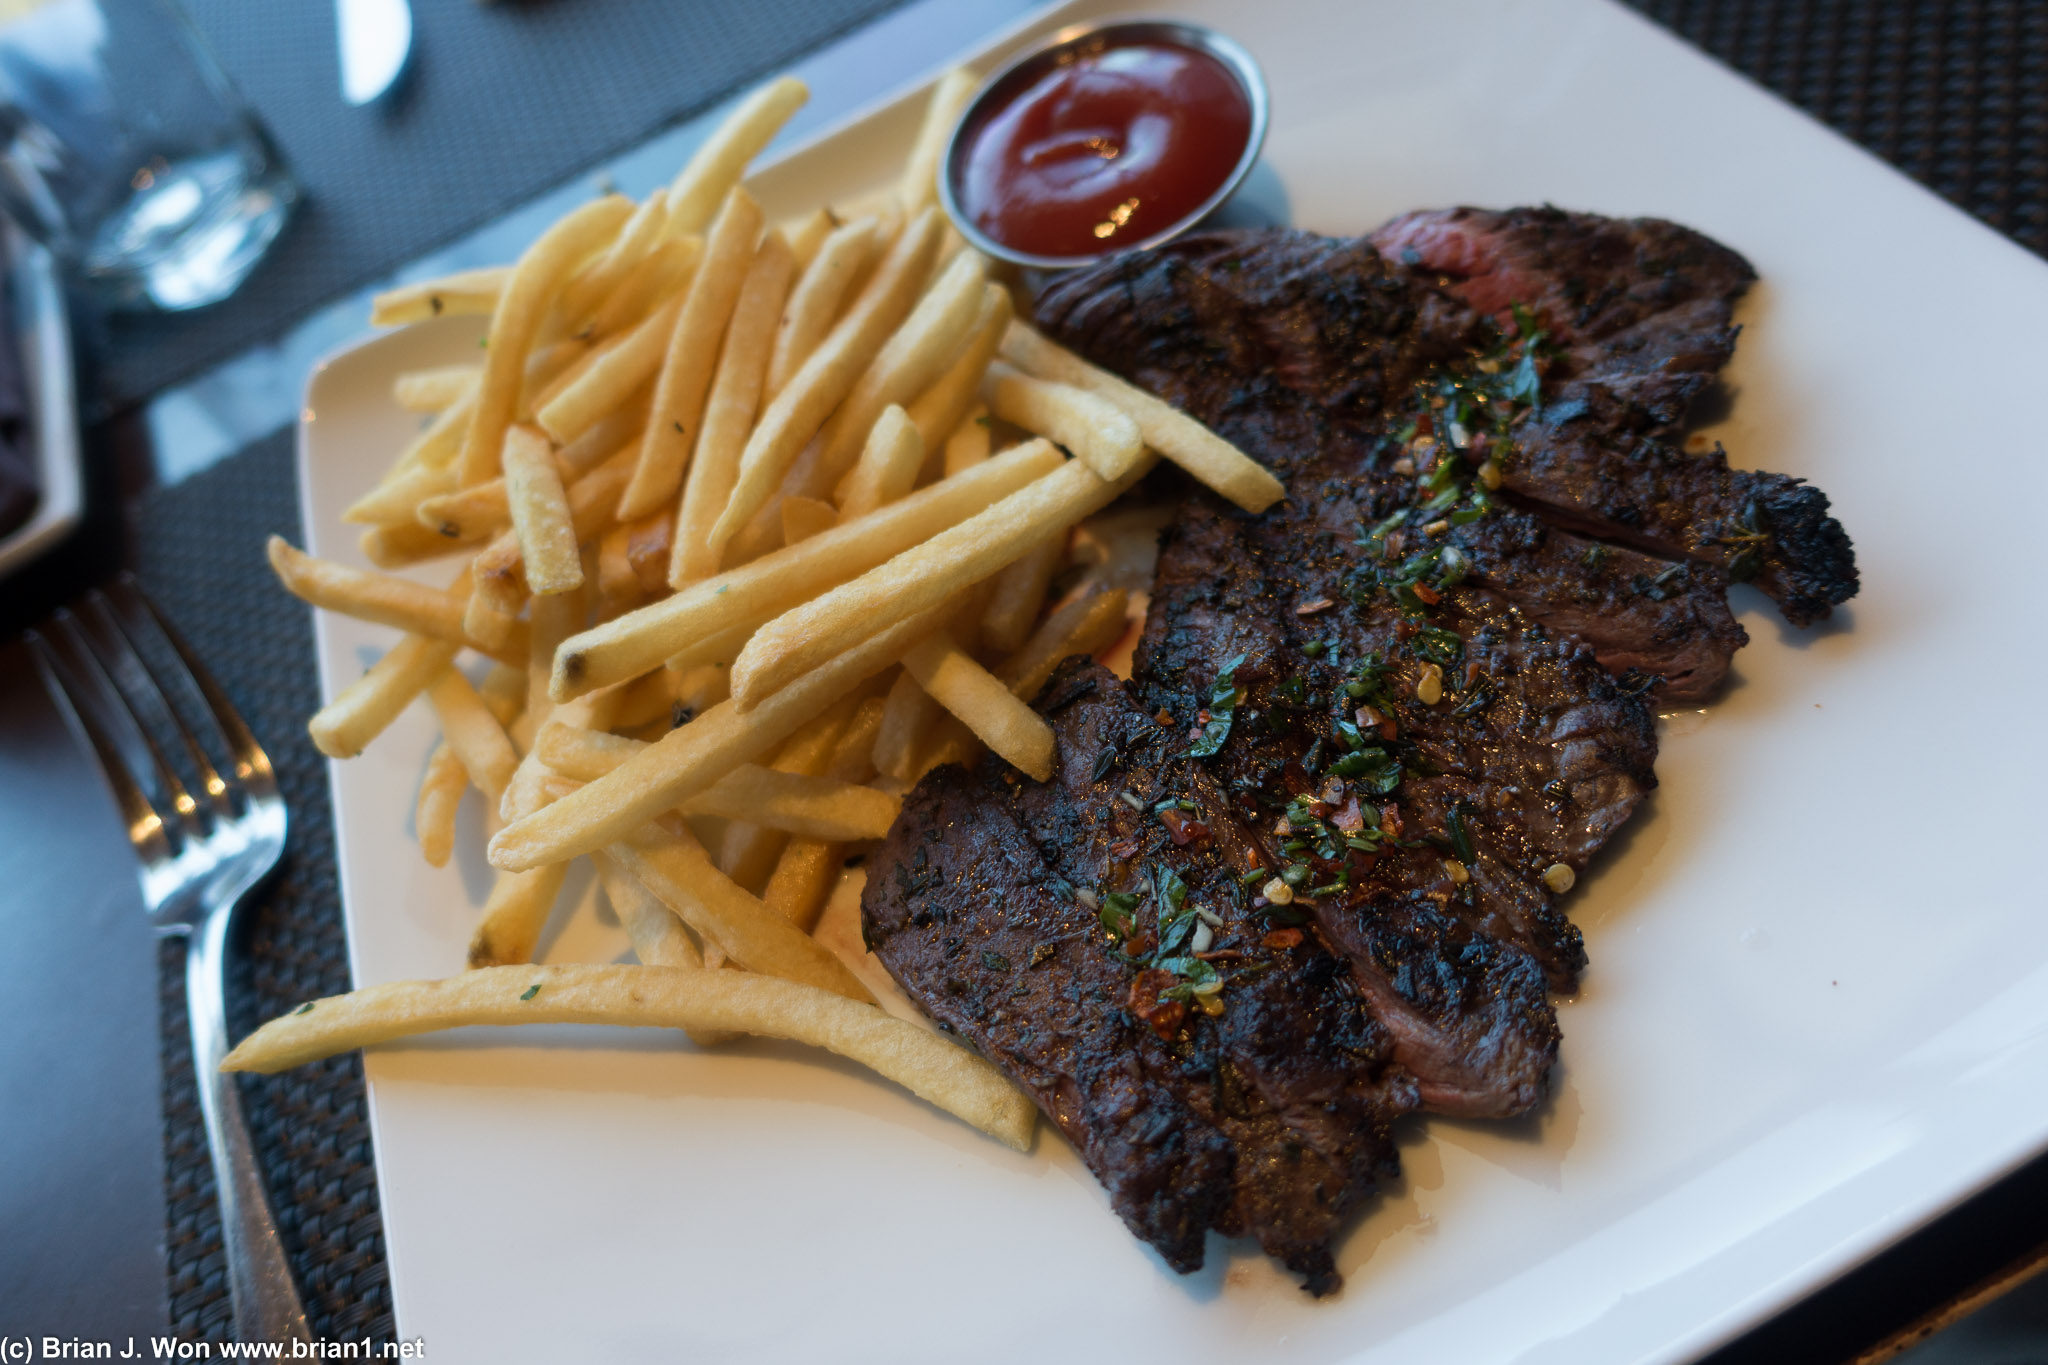 Grilled skirt steak and fries. Garlic aioli was a nice touch but would've preferred a little cup of it.